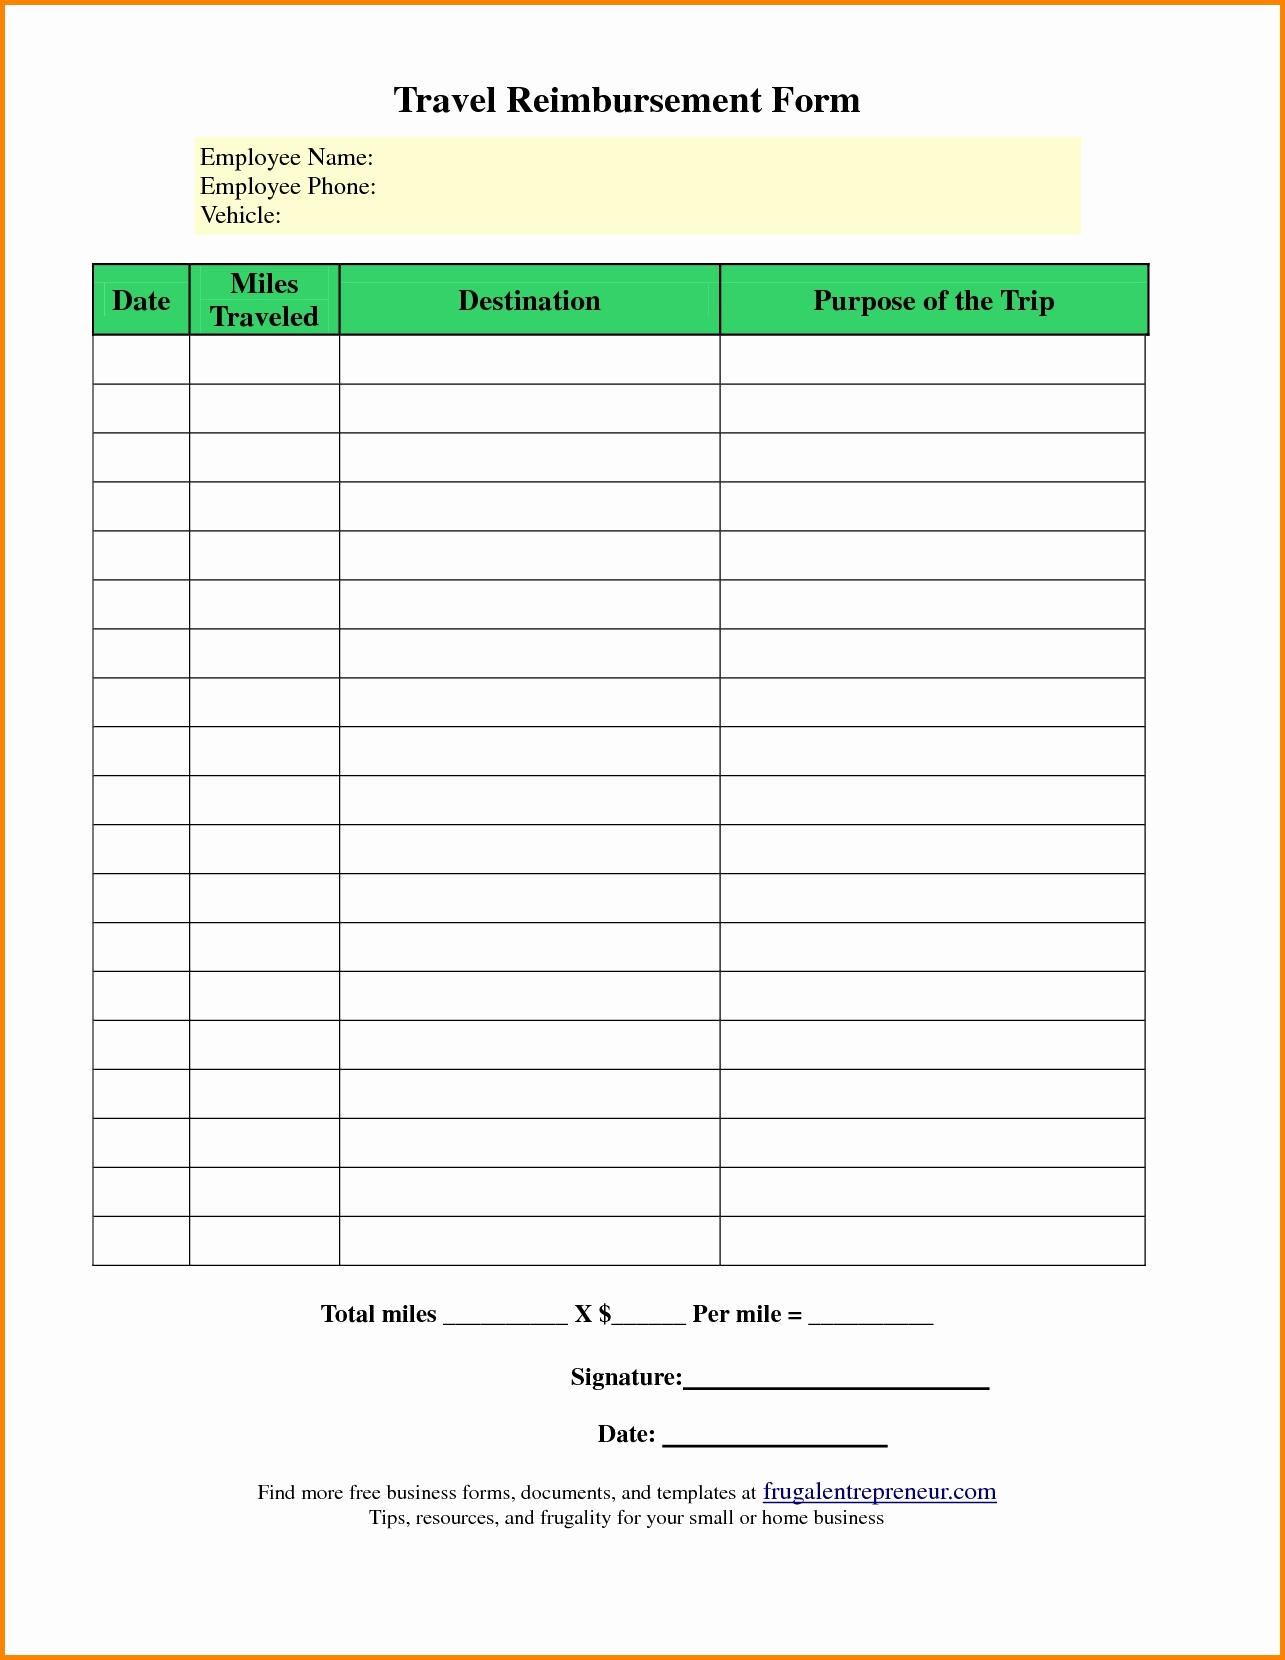 Free Ifta Spreadsheet Template In Example Of Iftapreadsheet Tripheets Templateelo L Ink Co Free Excel